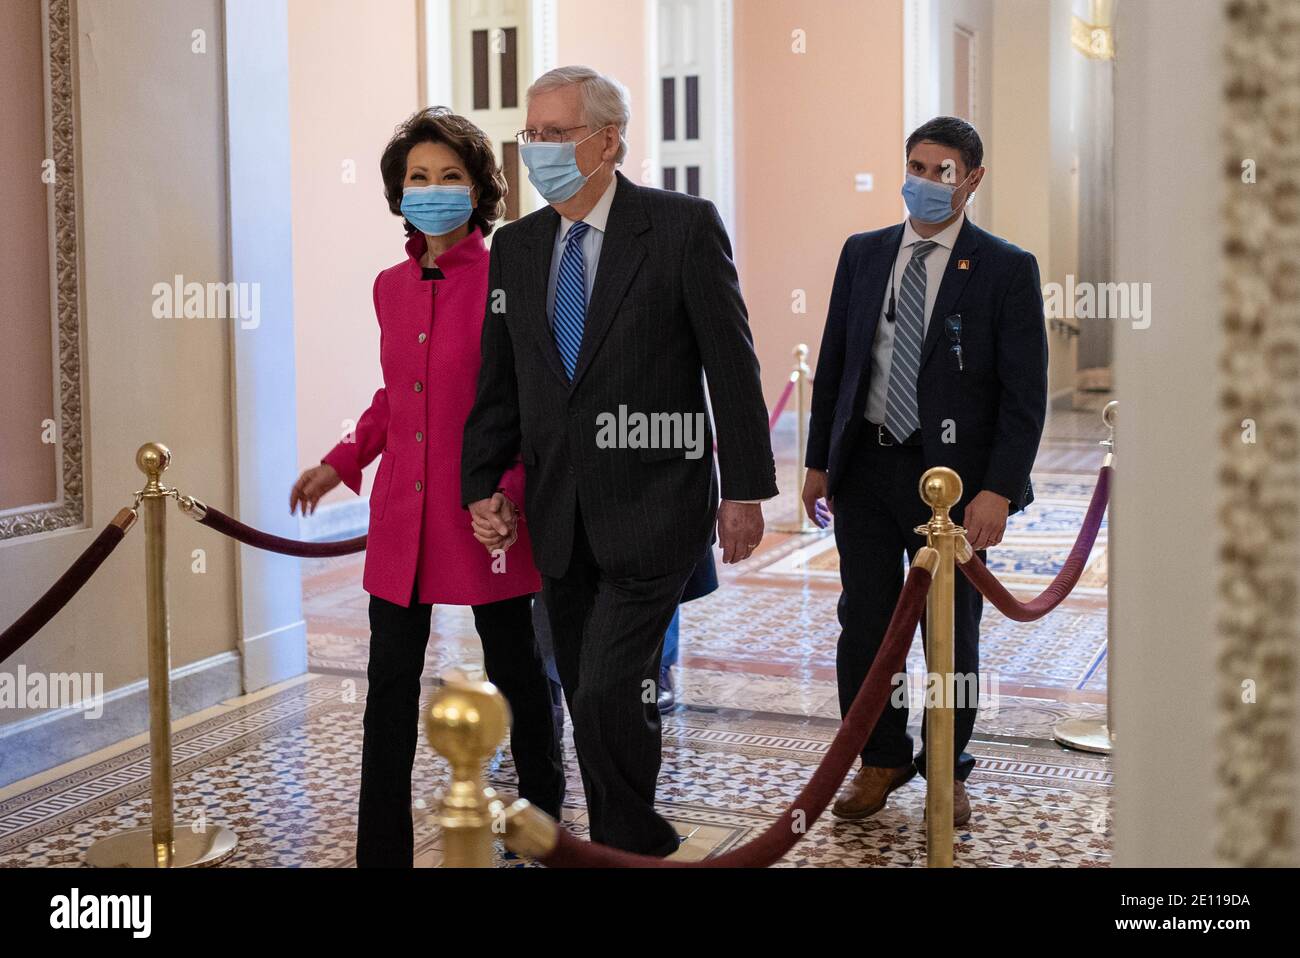 Washington, United States. 03rd Jan, 2021. U.S. Sen. Majority Leader Mitch McConnell (R-KY) walks with his wife Elaine Chao to the Senate Floor as both chambers are holding sessions to open the new 117th Congress on January 3, 2021 in Washington DC. Photo by Ken Cedeno/Sipa USA Credit: Sipa USA/Alamy Live News Stock Photo